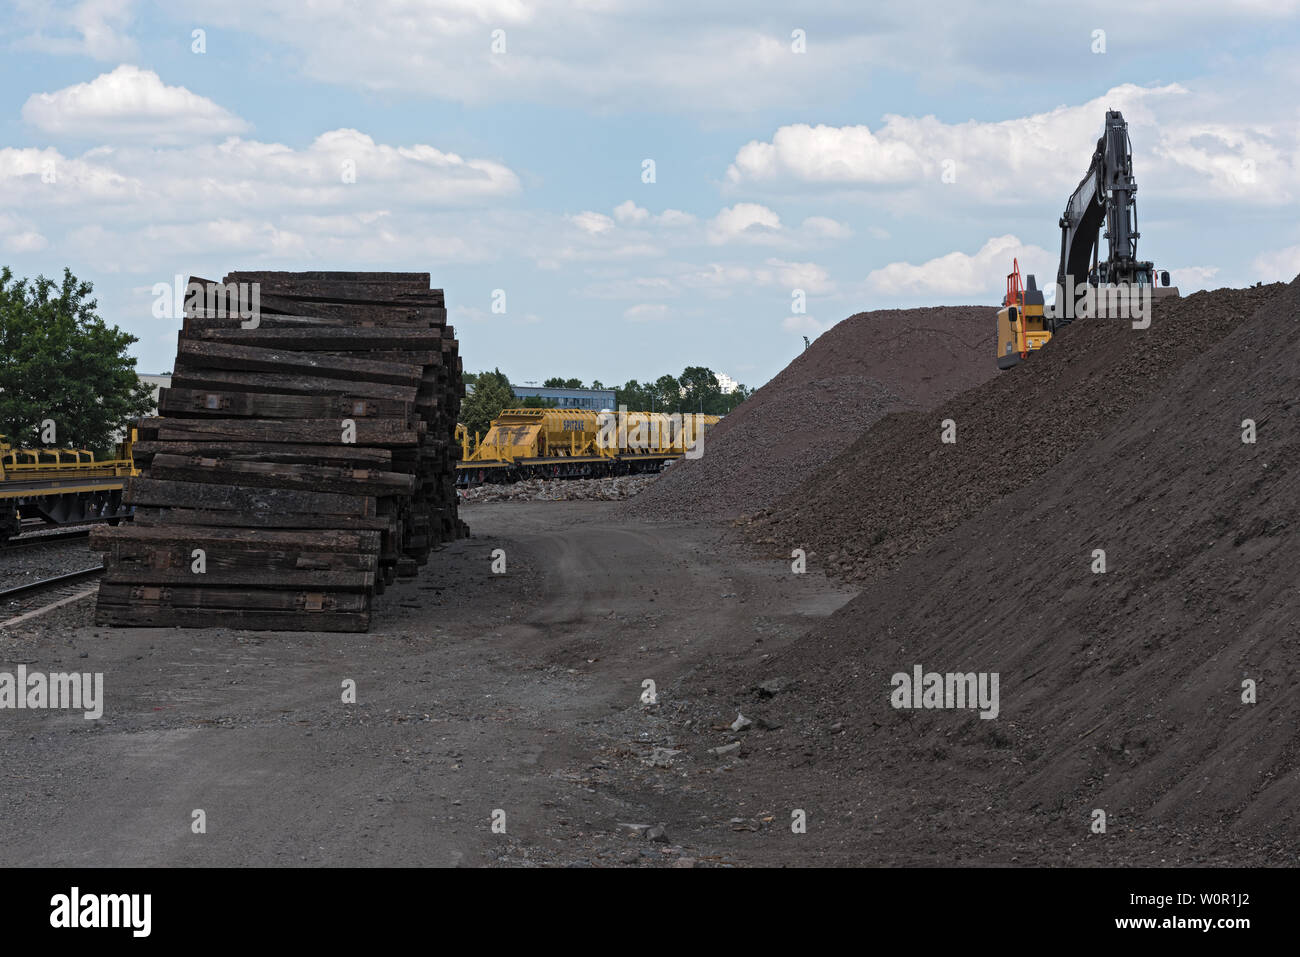 machine park and storage area for railway construction Stock Photo